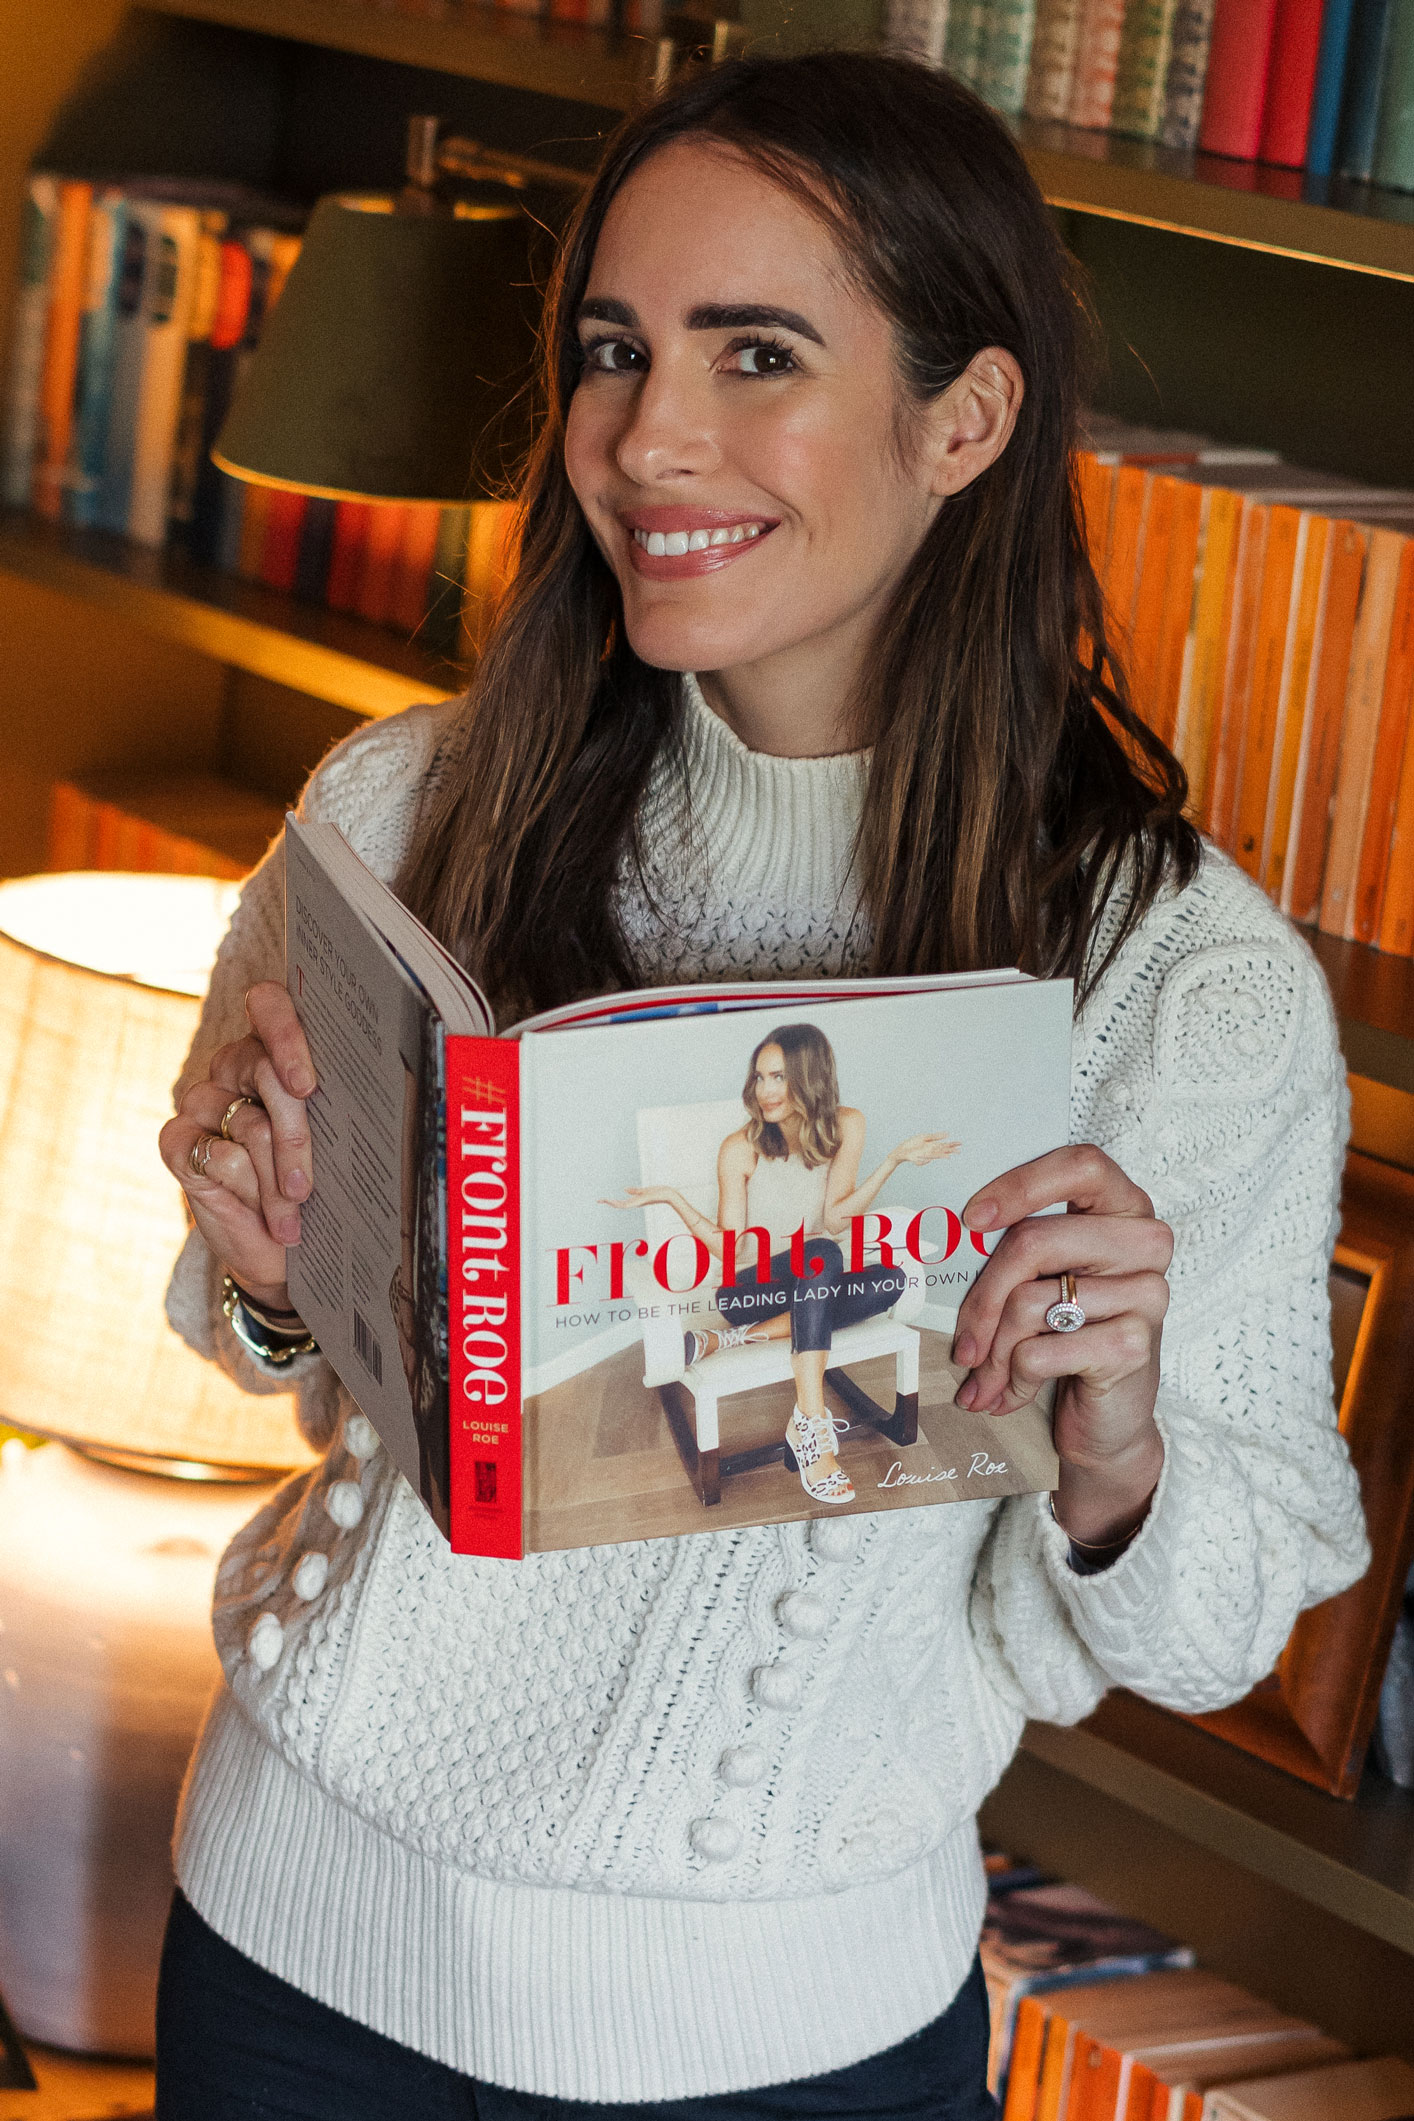 Louise Roe of Front Roe chooses 5 women who inspire her work ethic